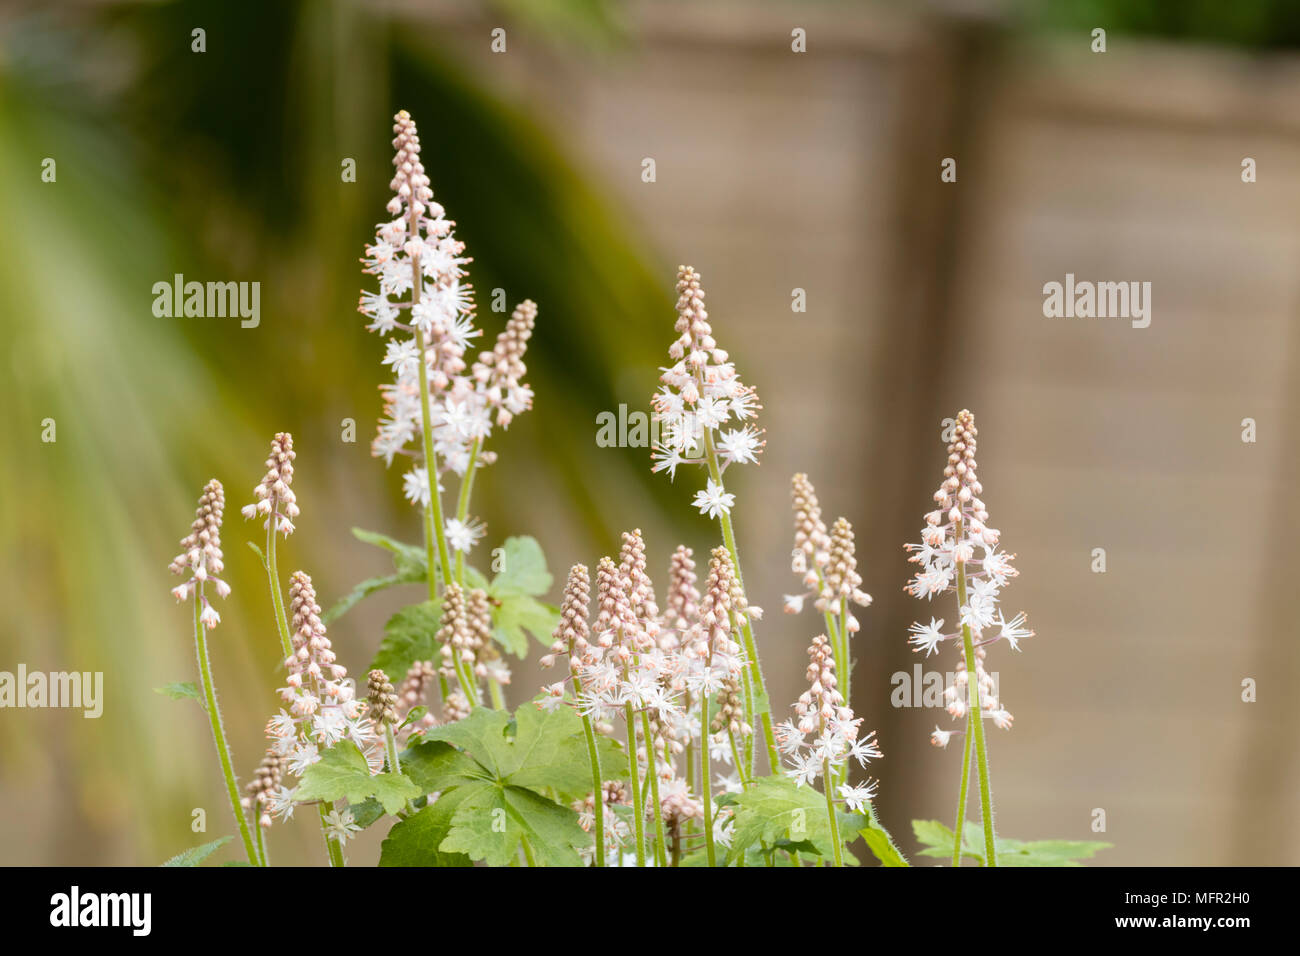 White flowers on the spikes of the spring flowering perennial foam flower, Tiarella 'Iron Butterfly' Stock Photo